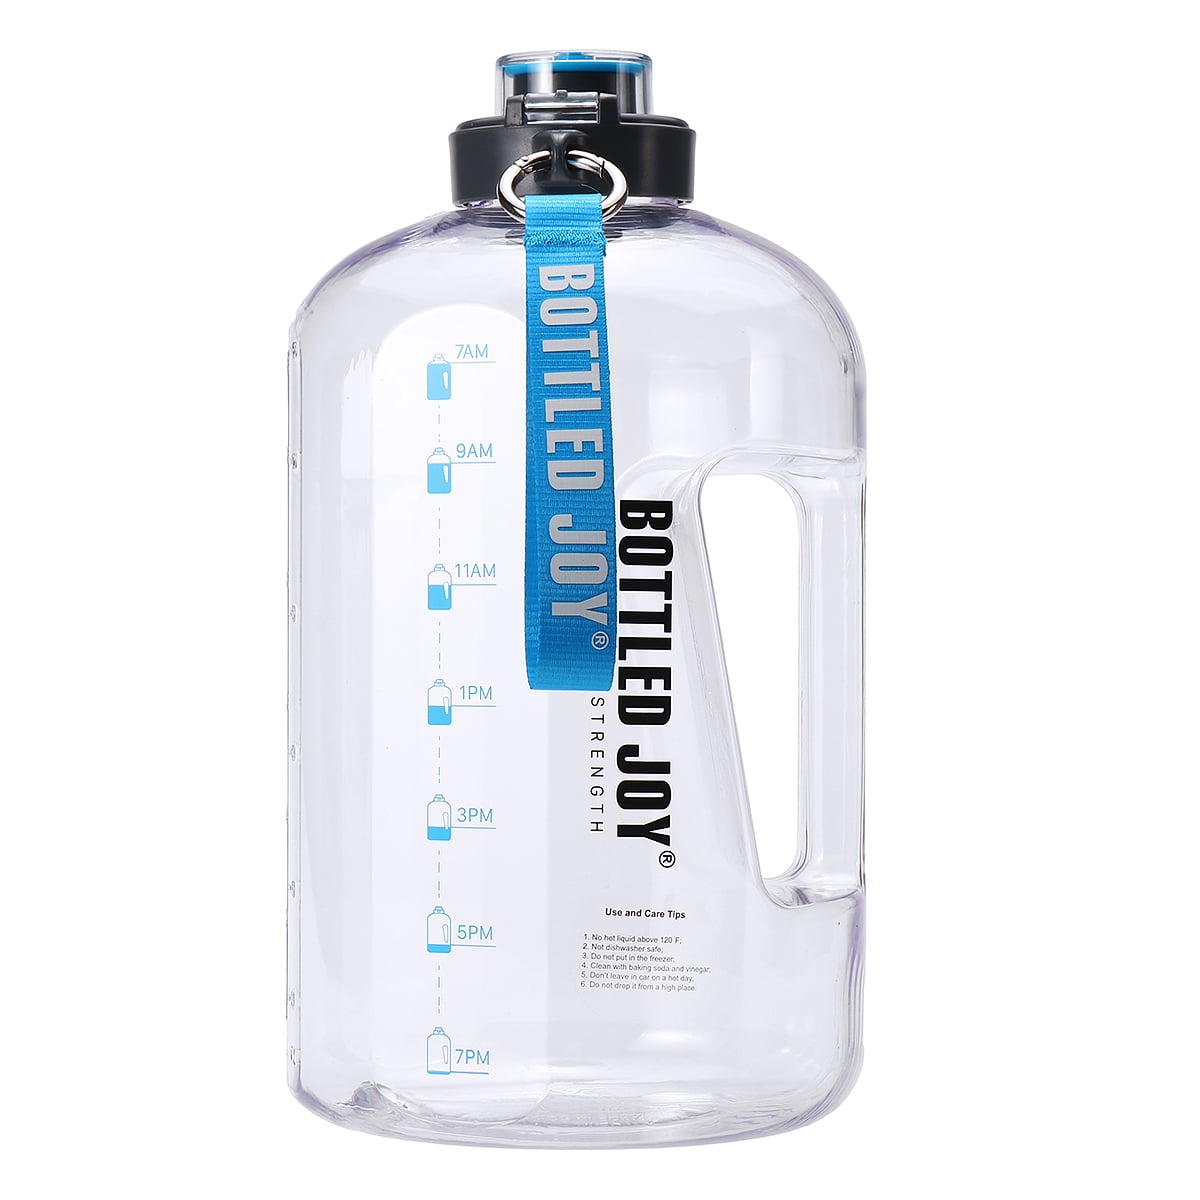 BPA Free 128oz Large Water Bottle Hydration with Motivational Time Marker Reminder Leak-Proof Drinking Big Water Jug for Camping Sports Workouts and Outdoor Activity BOTTLED JOY 1 Gallon Water Bottle 